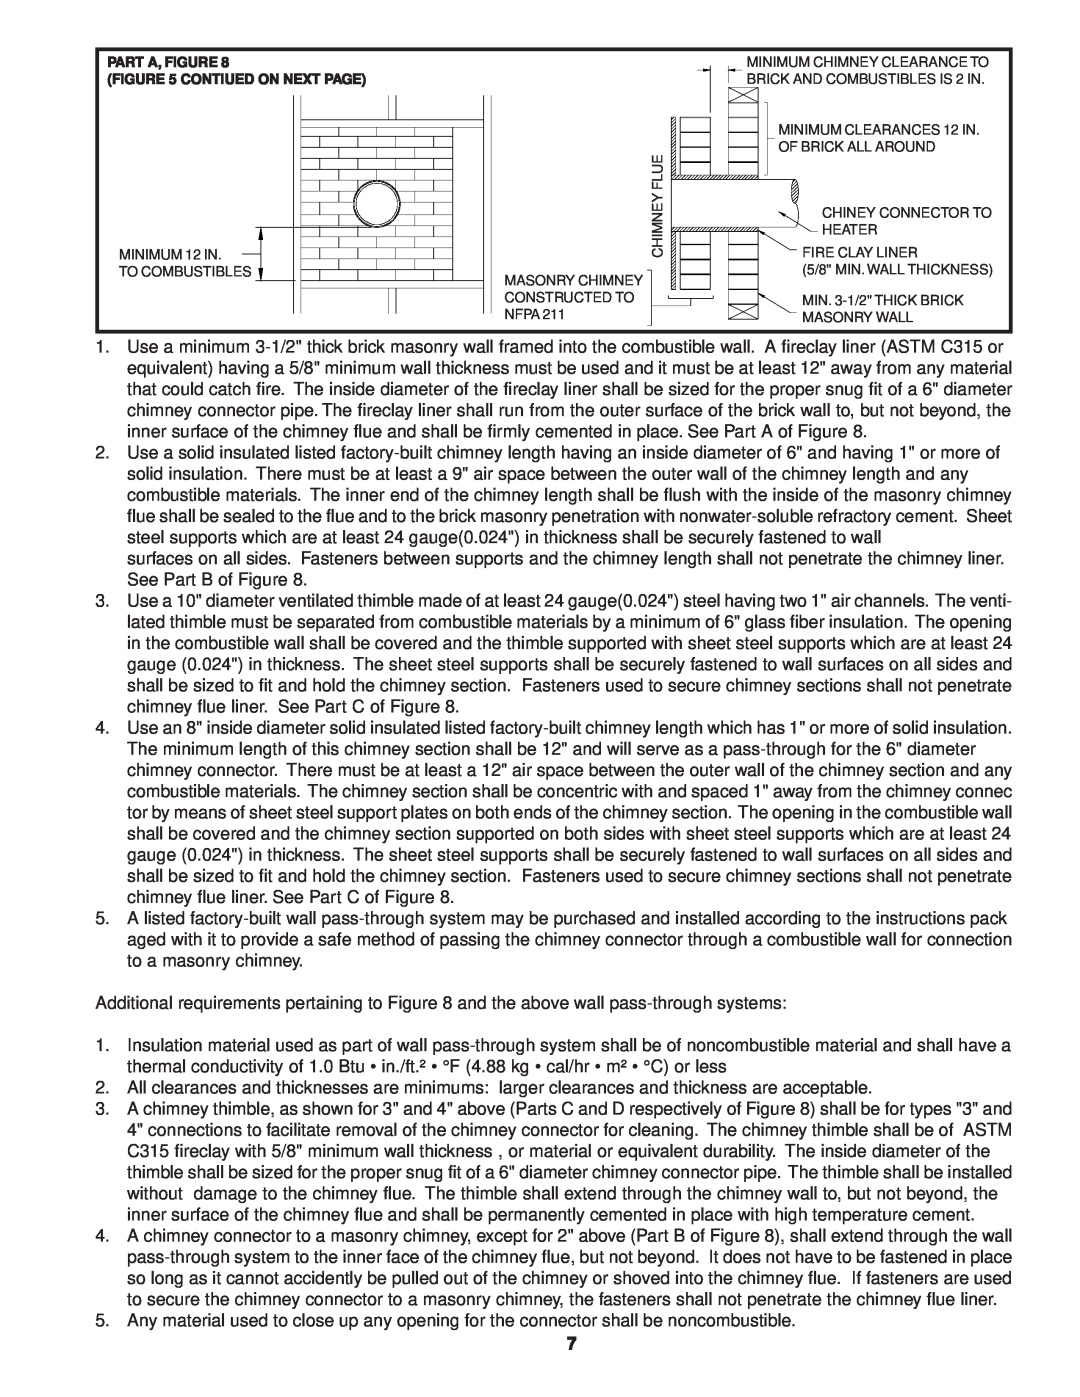 United States Stove C242 owner manual Part A, Figure Contiued On Next Page, MINIMUM 12 IN TO COMBUSTIBLES, Masonry Wall 